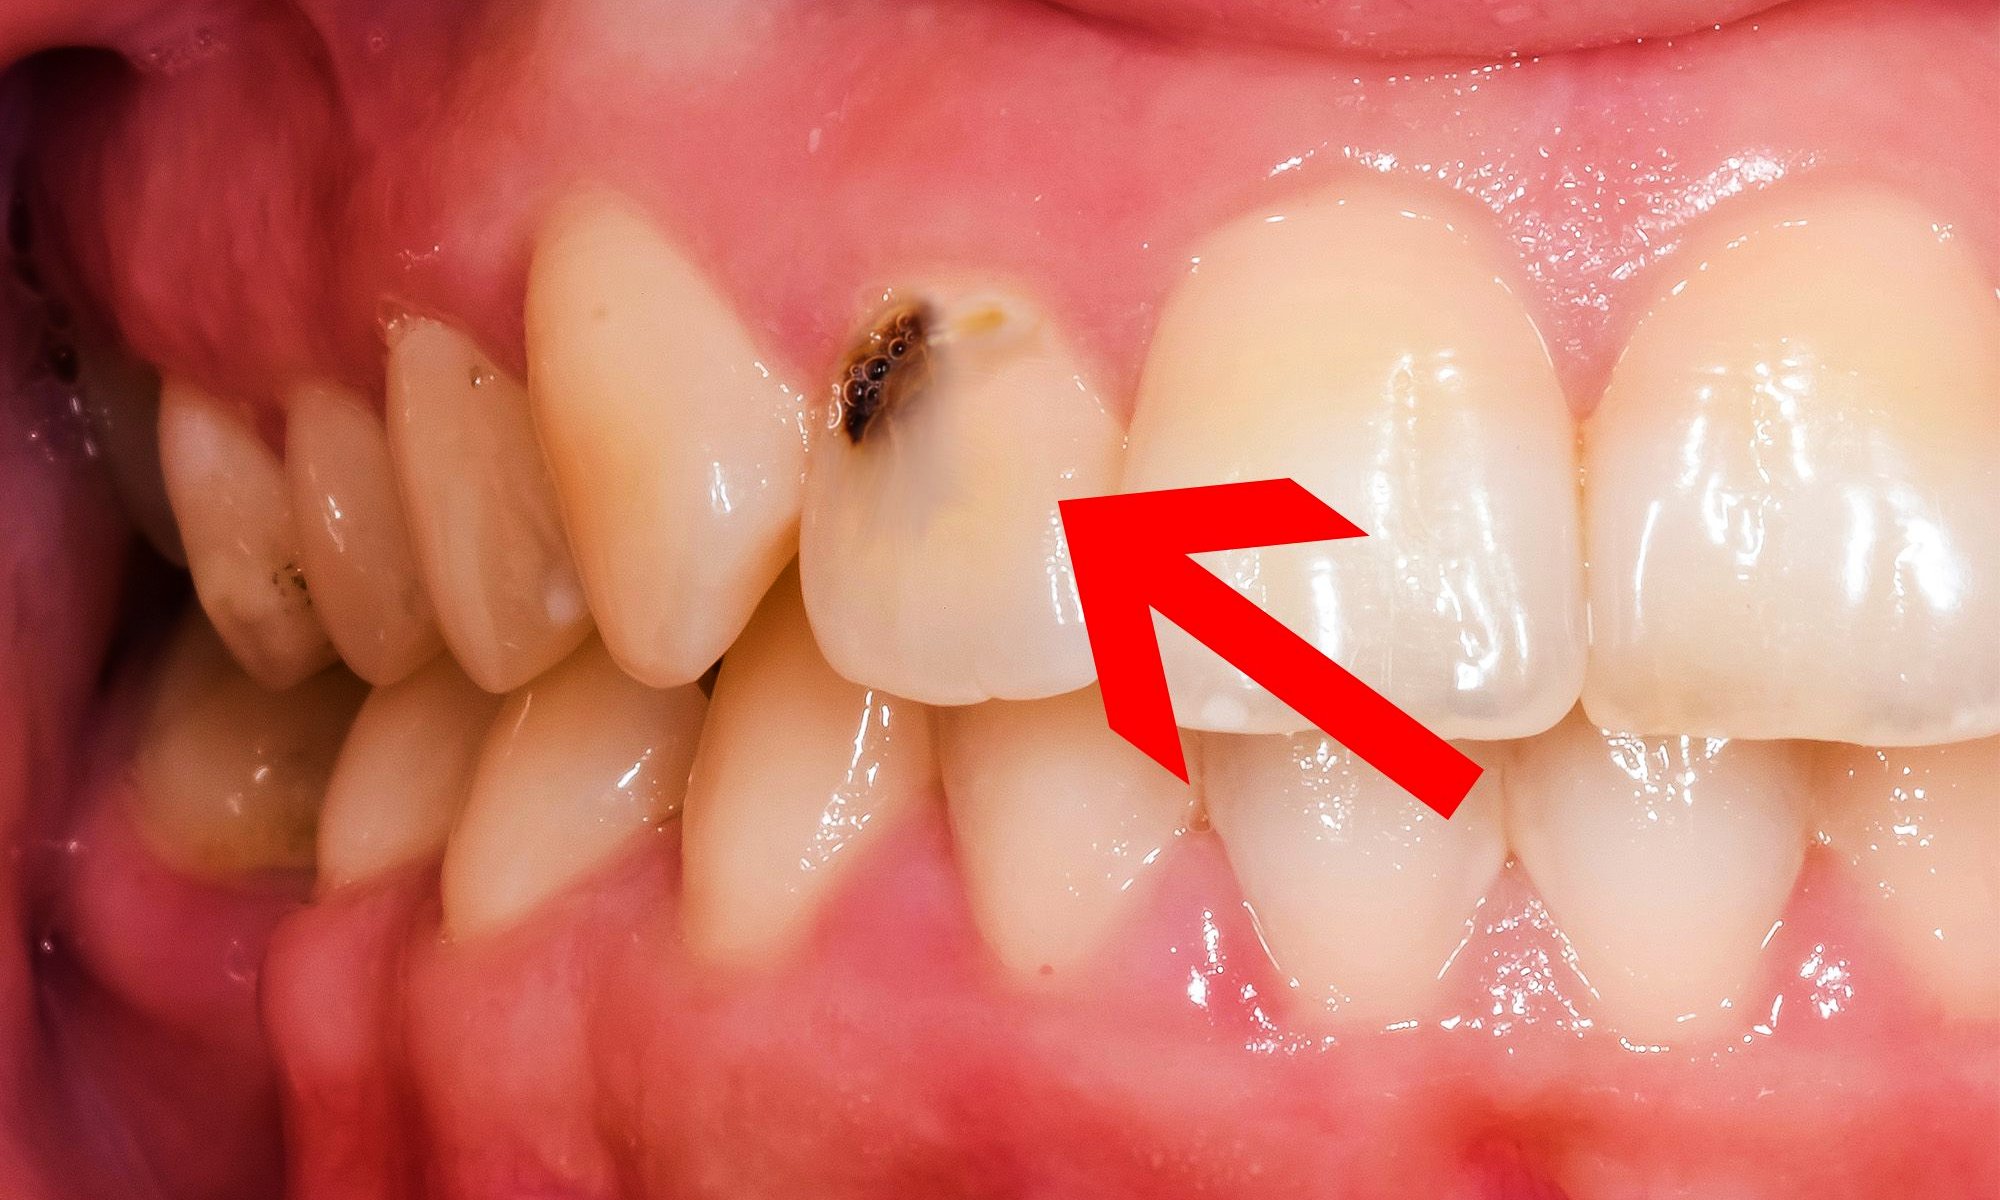 Cavity in front of teeth